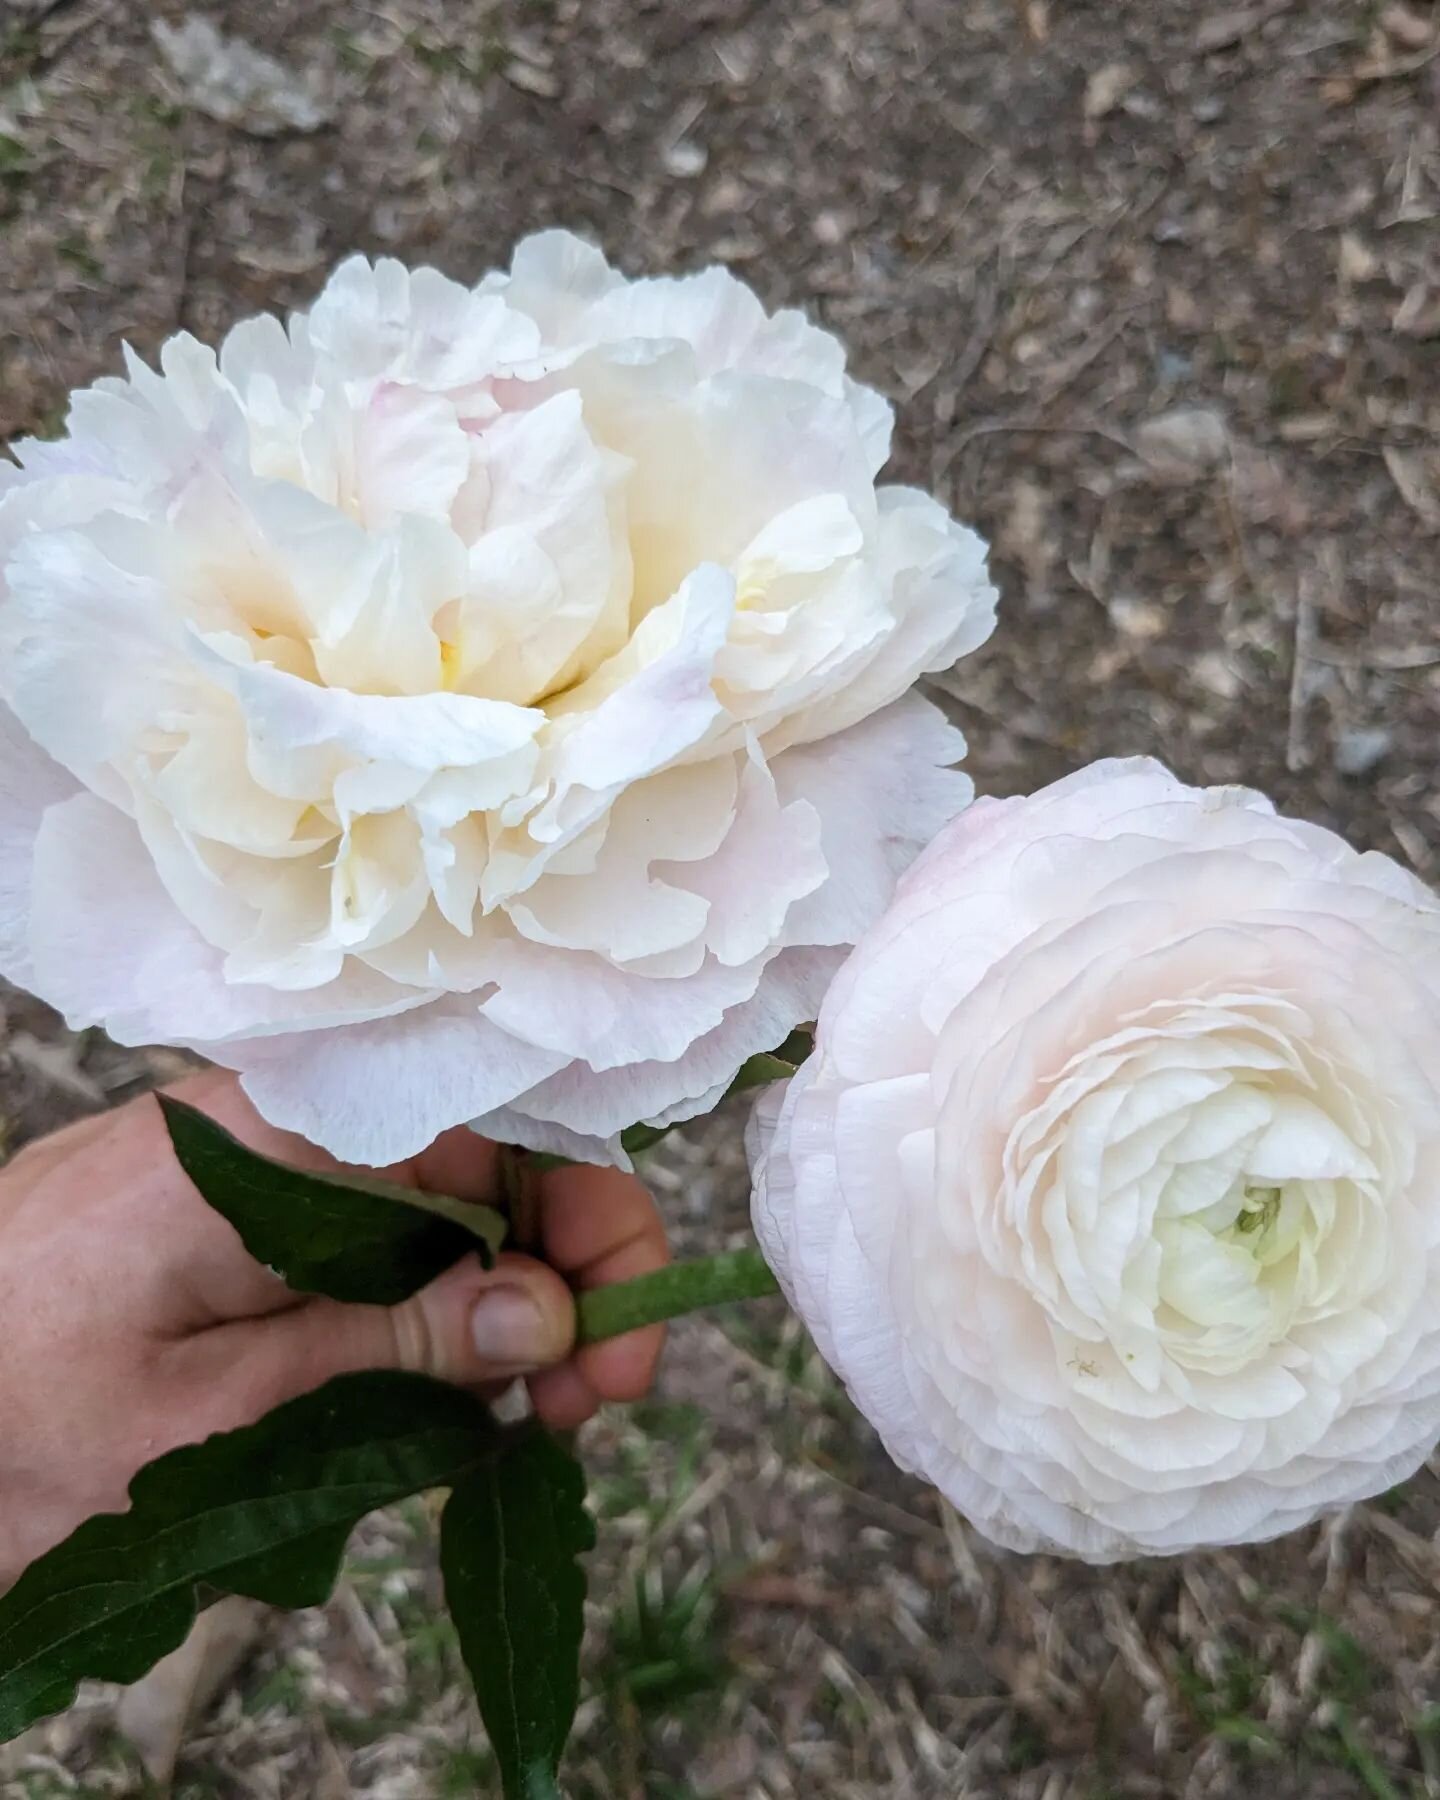 #peony or #ranunculus? All answers are correct.

I finally caved and added a couple peony varieties to our home front field this winter. While these won't be saleable until 2024/2025, who doesn't like a sneak peak?

This photo is also proof that if y